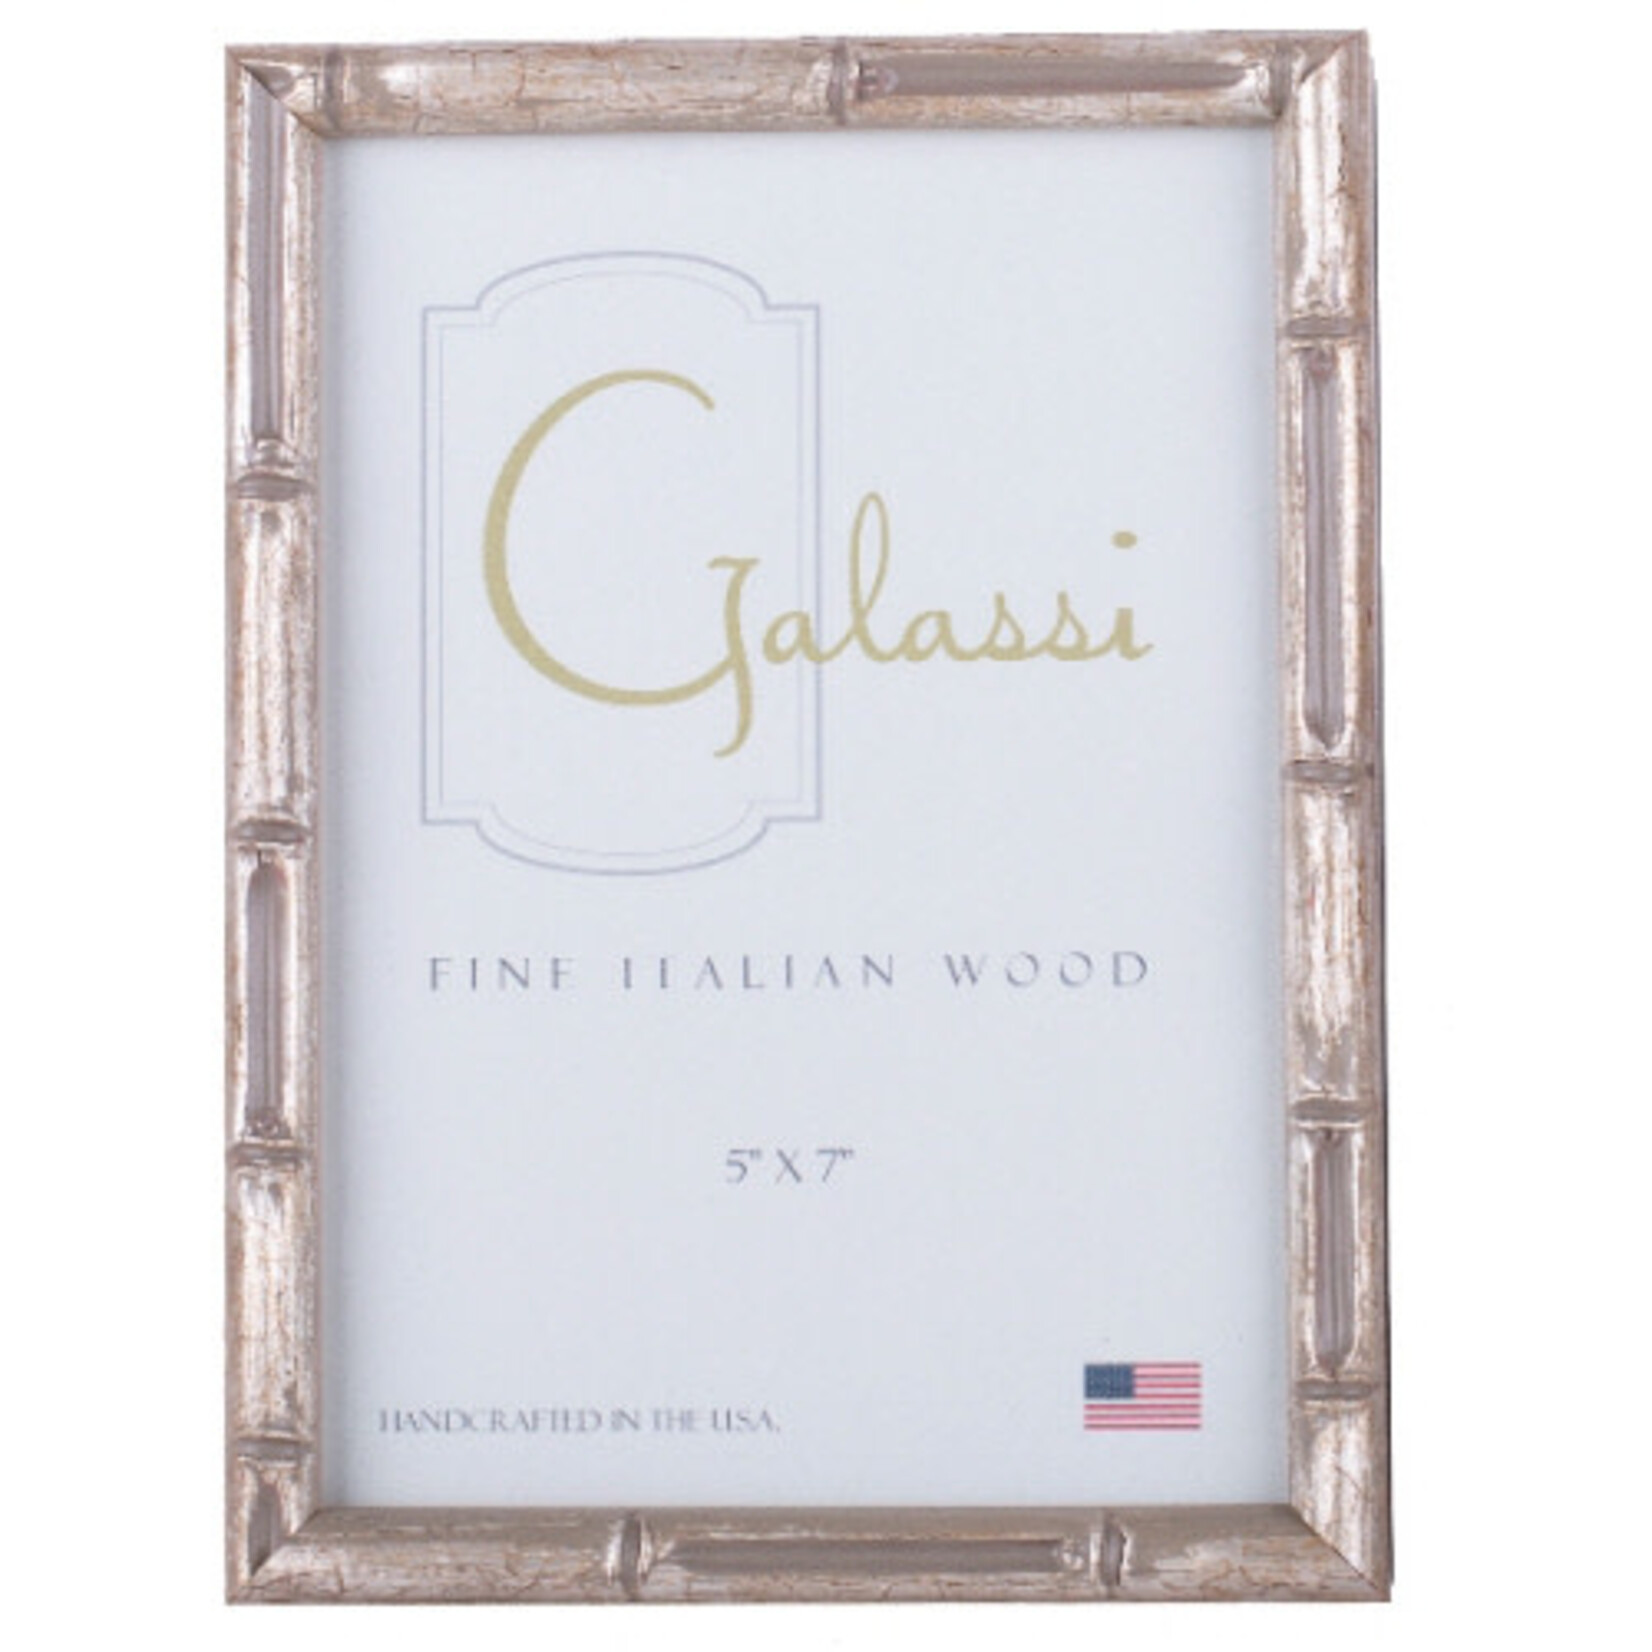 Galassi Silver Bamboo 5x7 Picture Frame